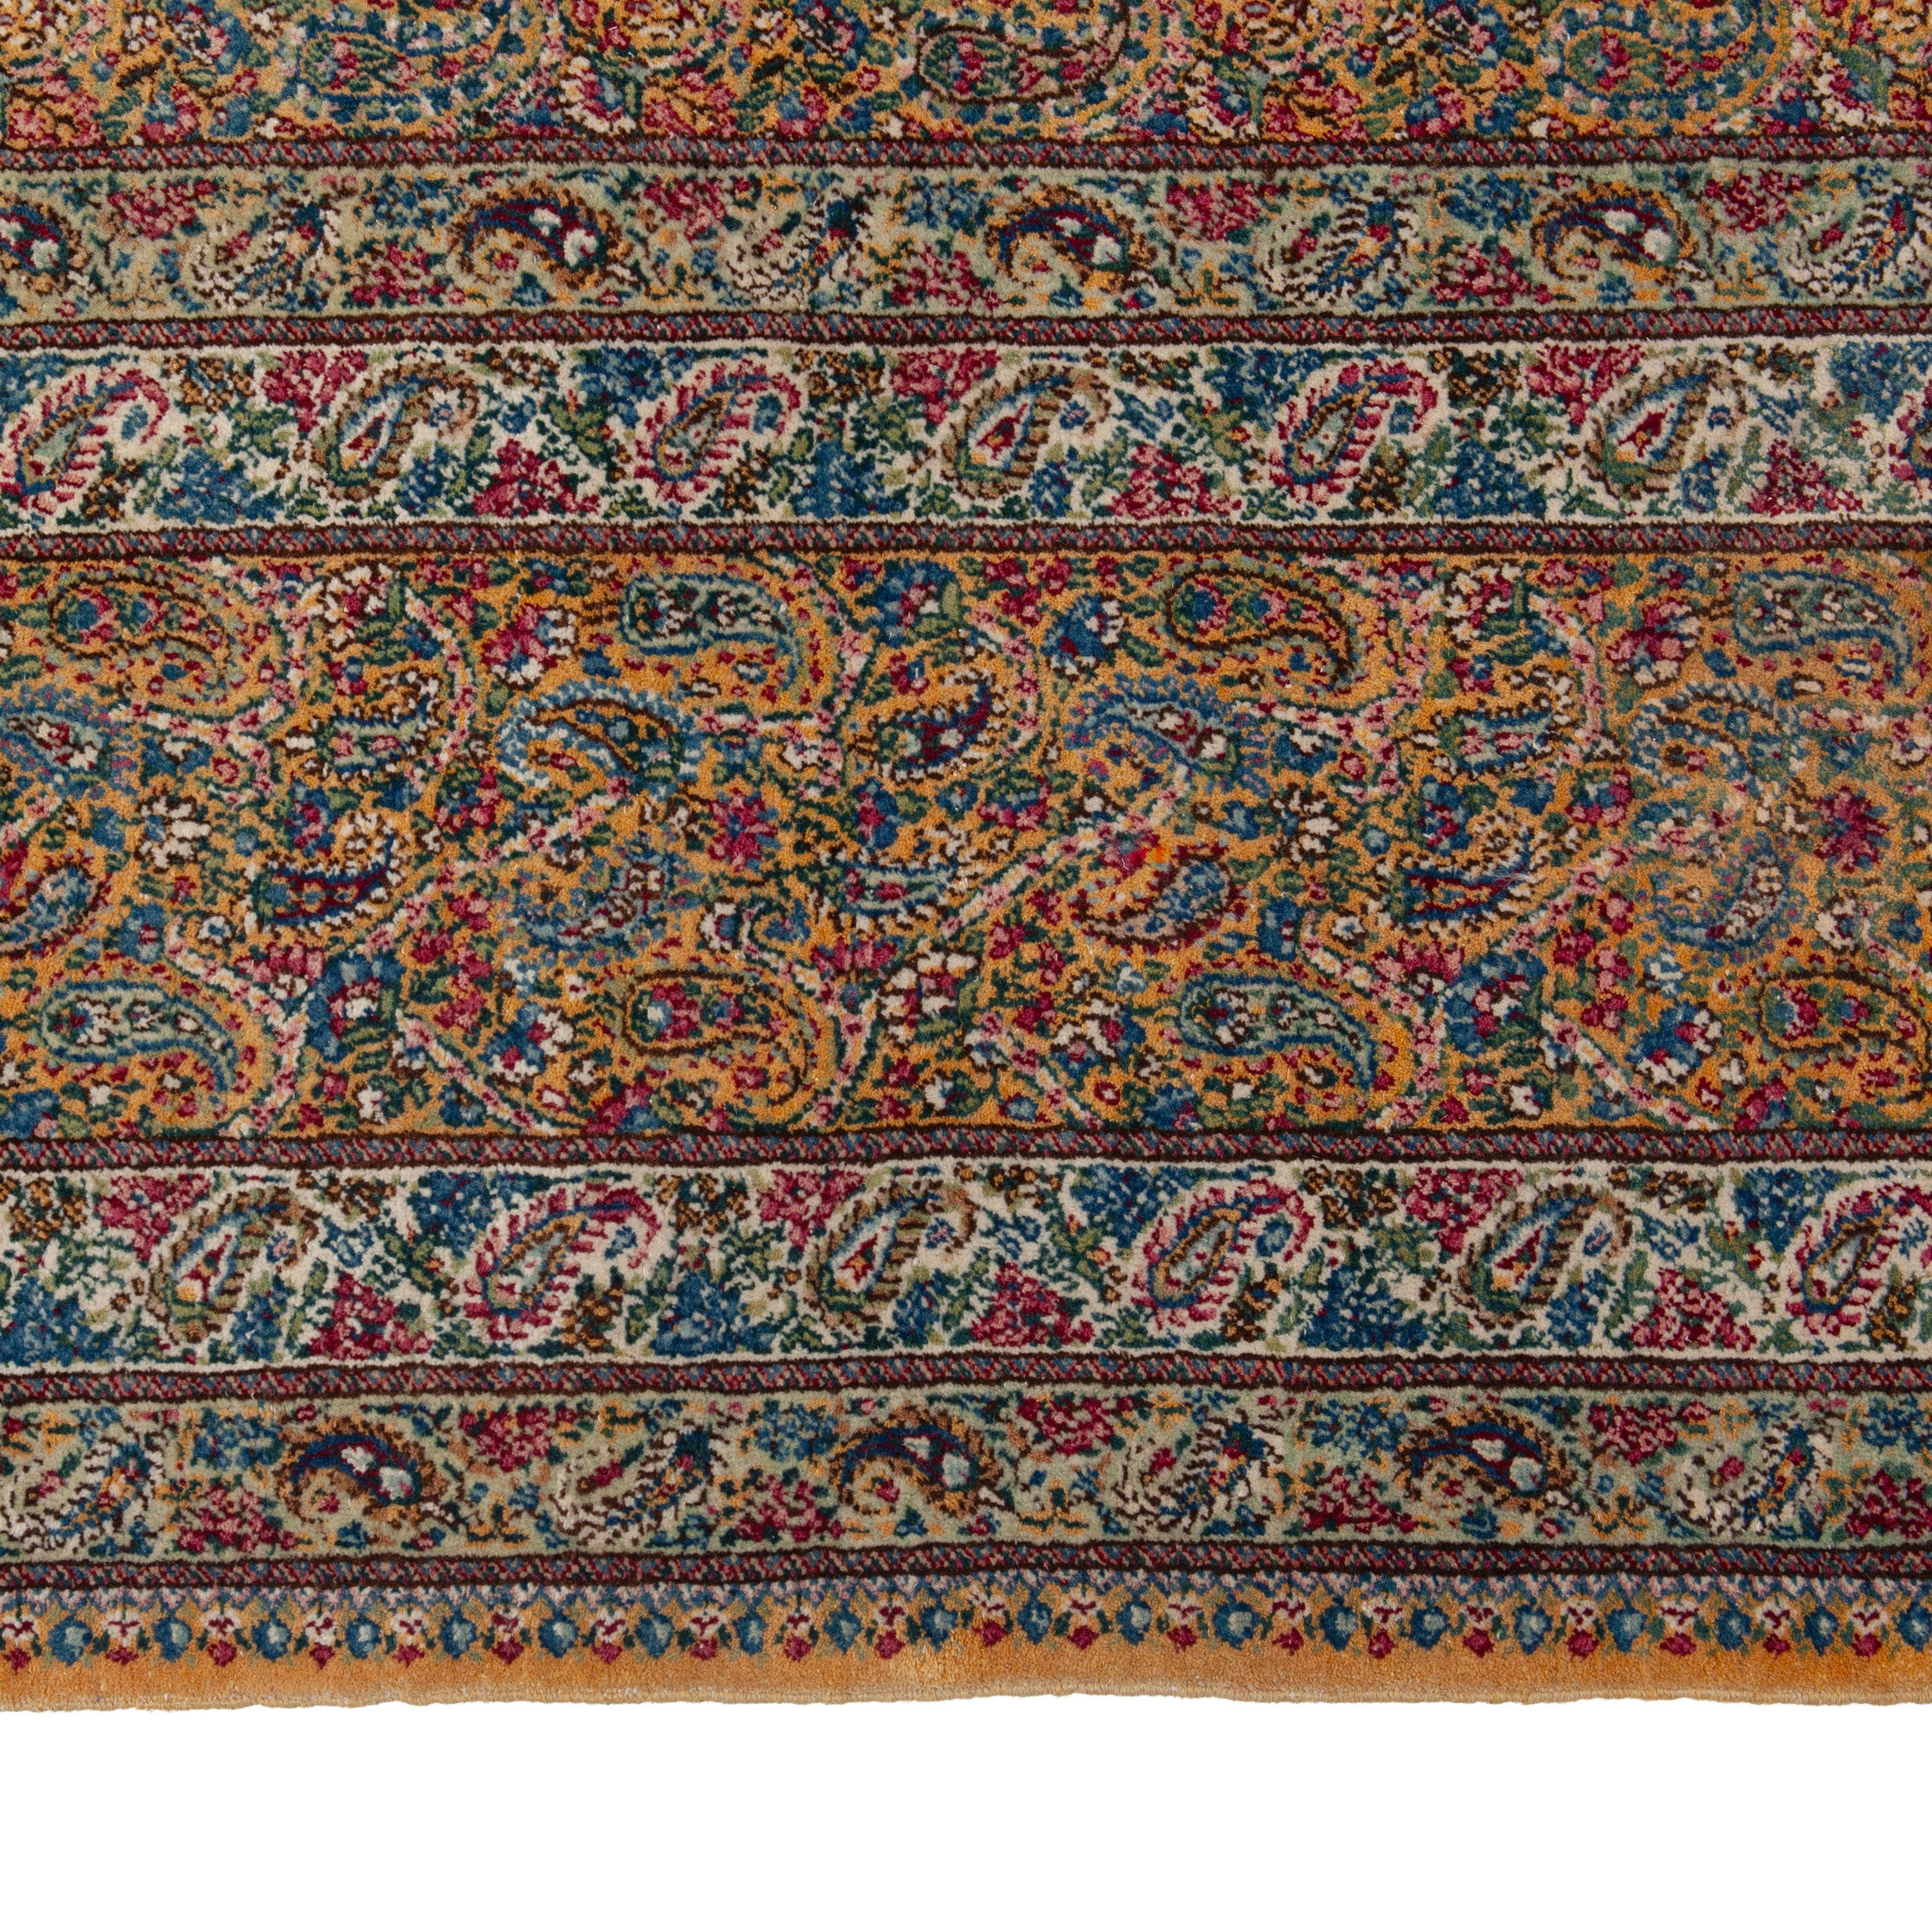 Gold Vintage Traditional Wool Rug - 11' x 17'